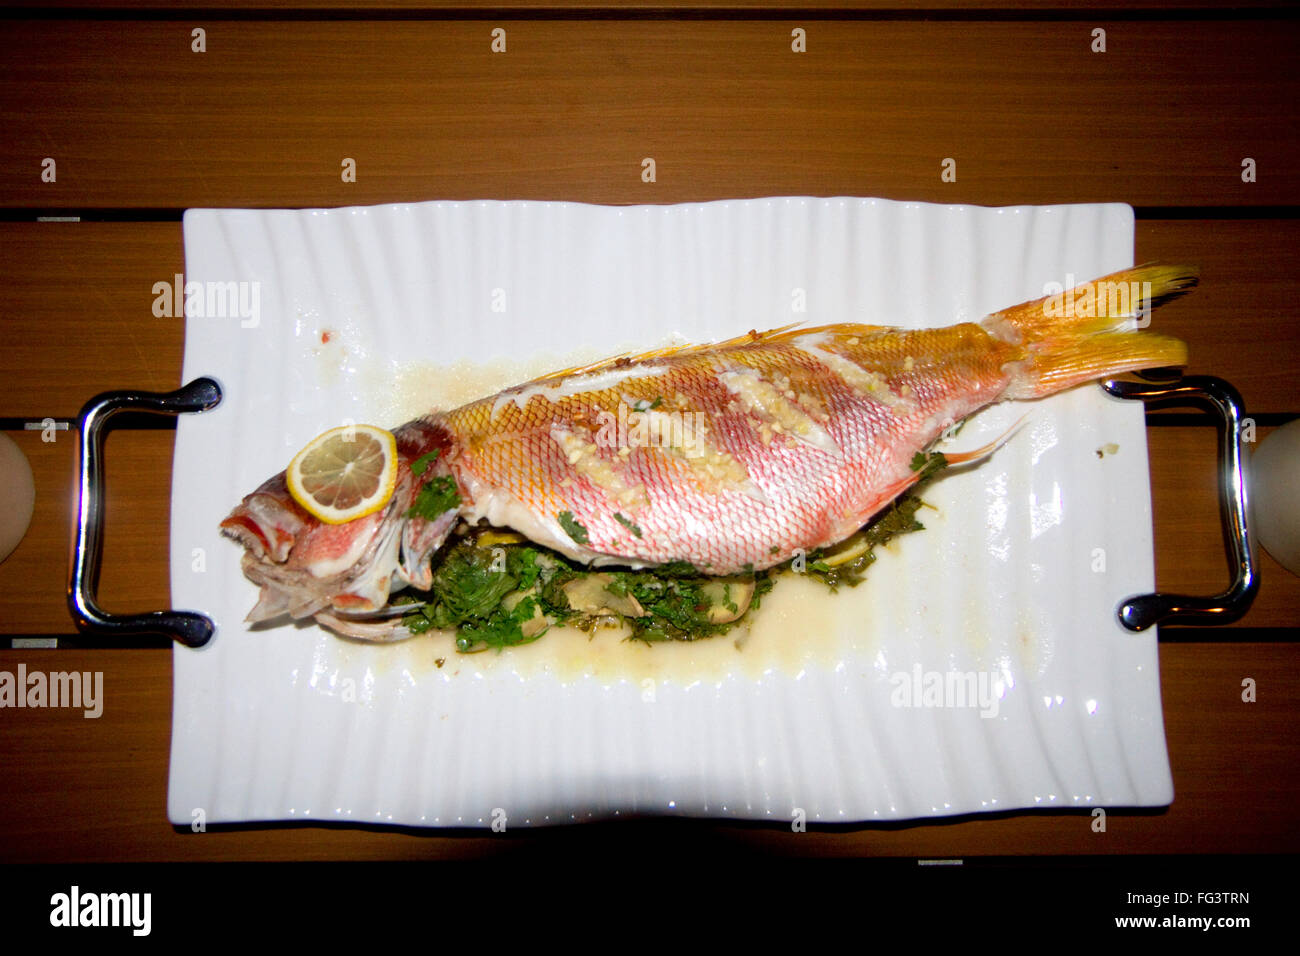 Whole cooked fish at a restaurant in Kona, Hawaii, USA. Stock Photo